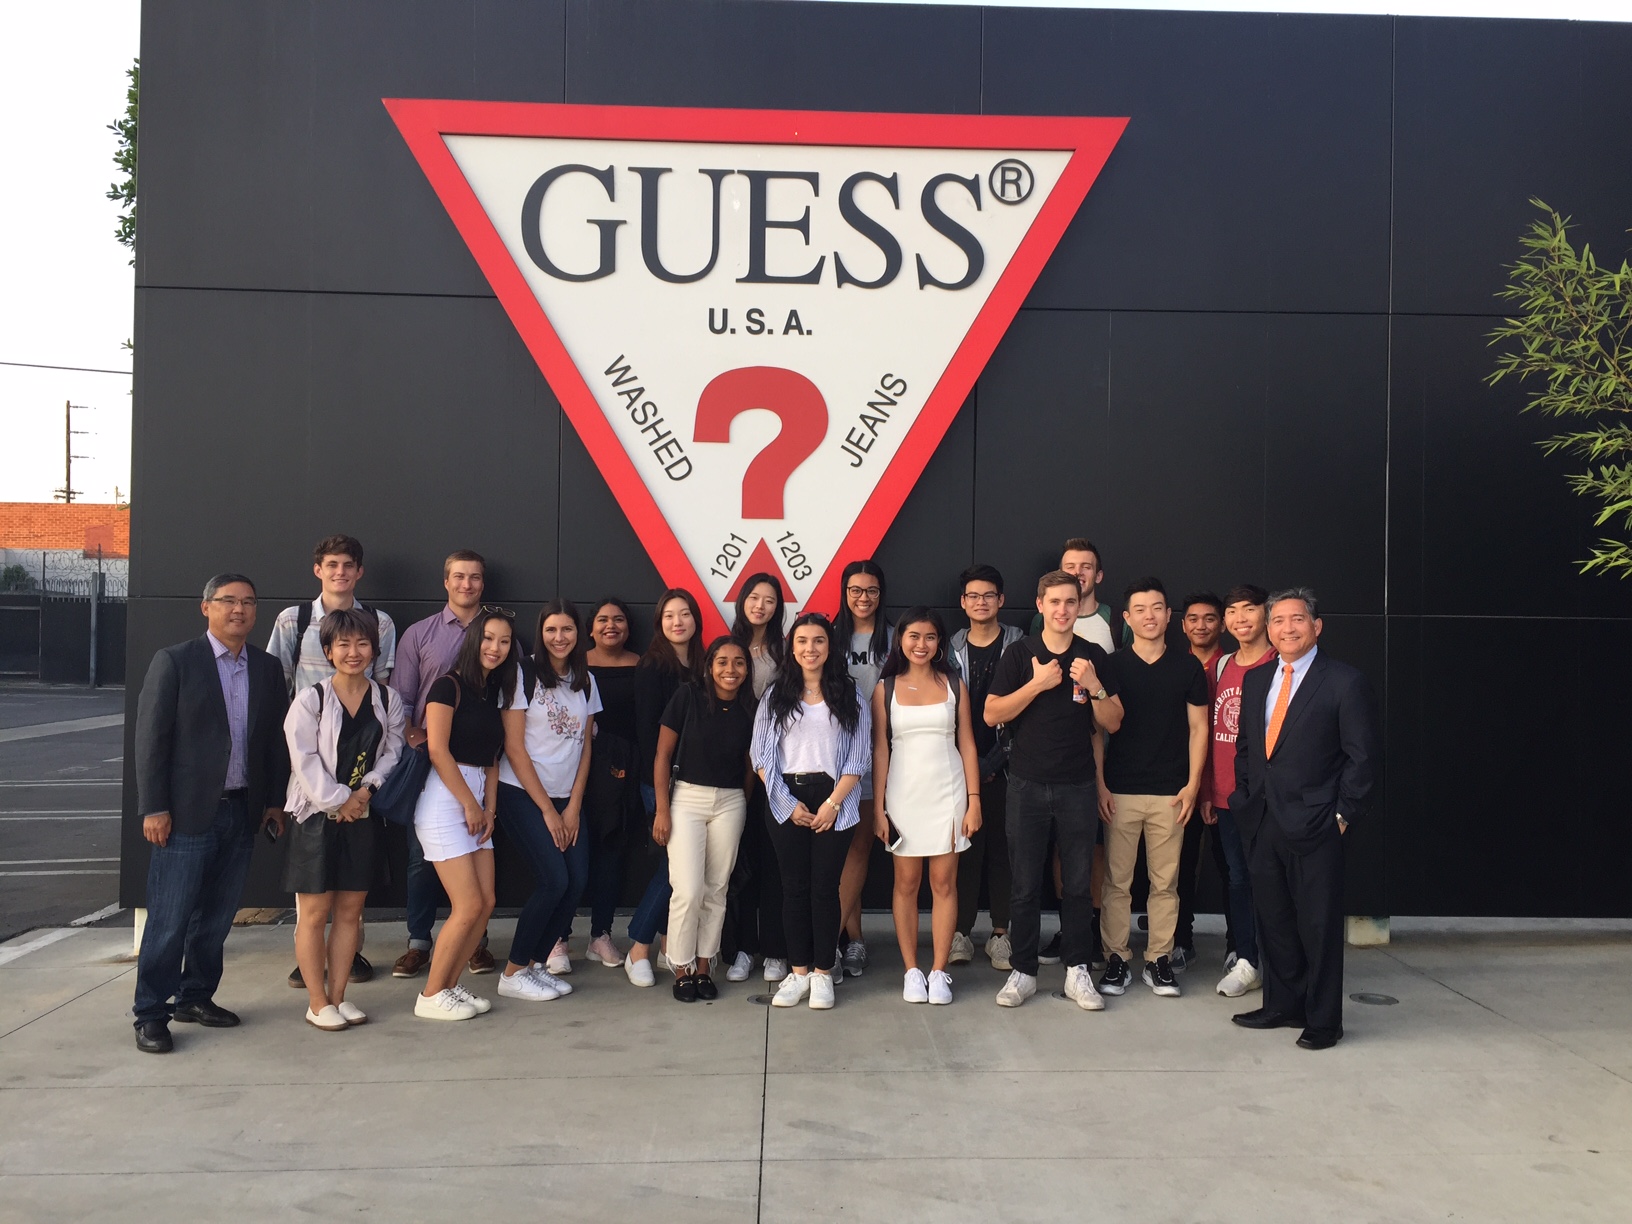 Professor Ching visiting Guess with students from ACCT/BUAD 385x Introduction to Risk Management and Insurance